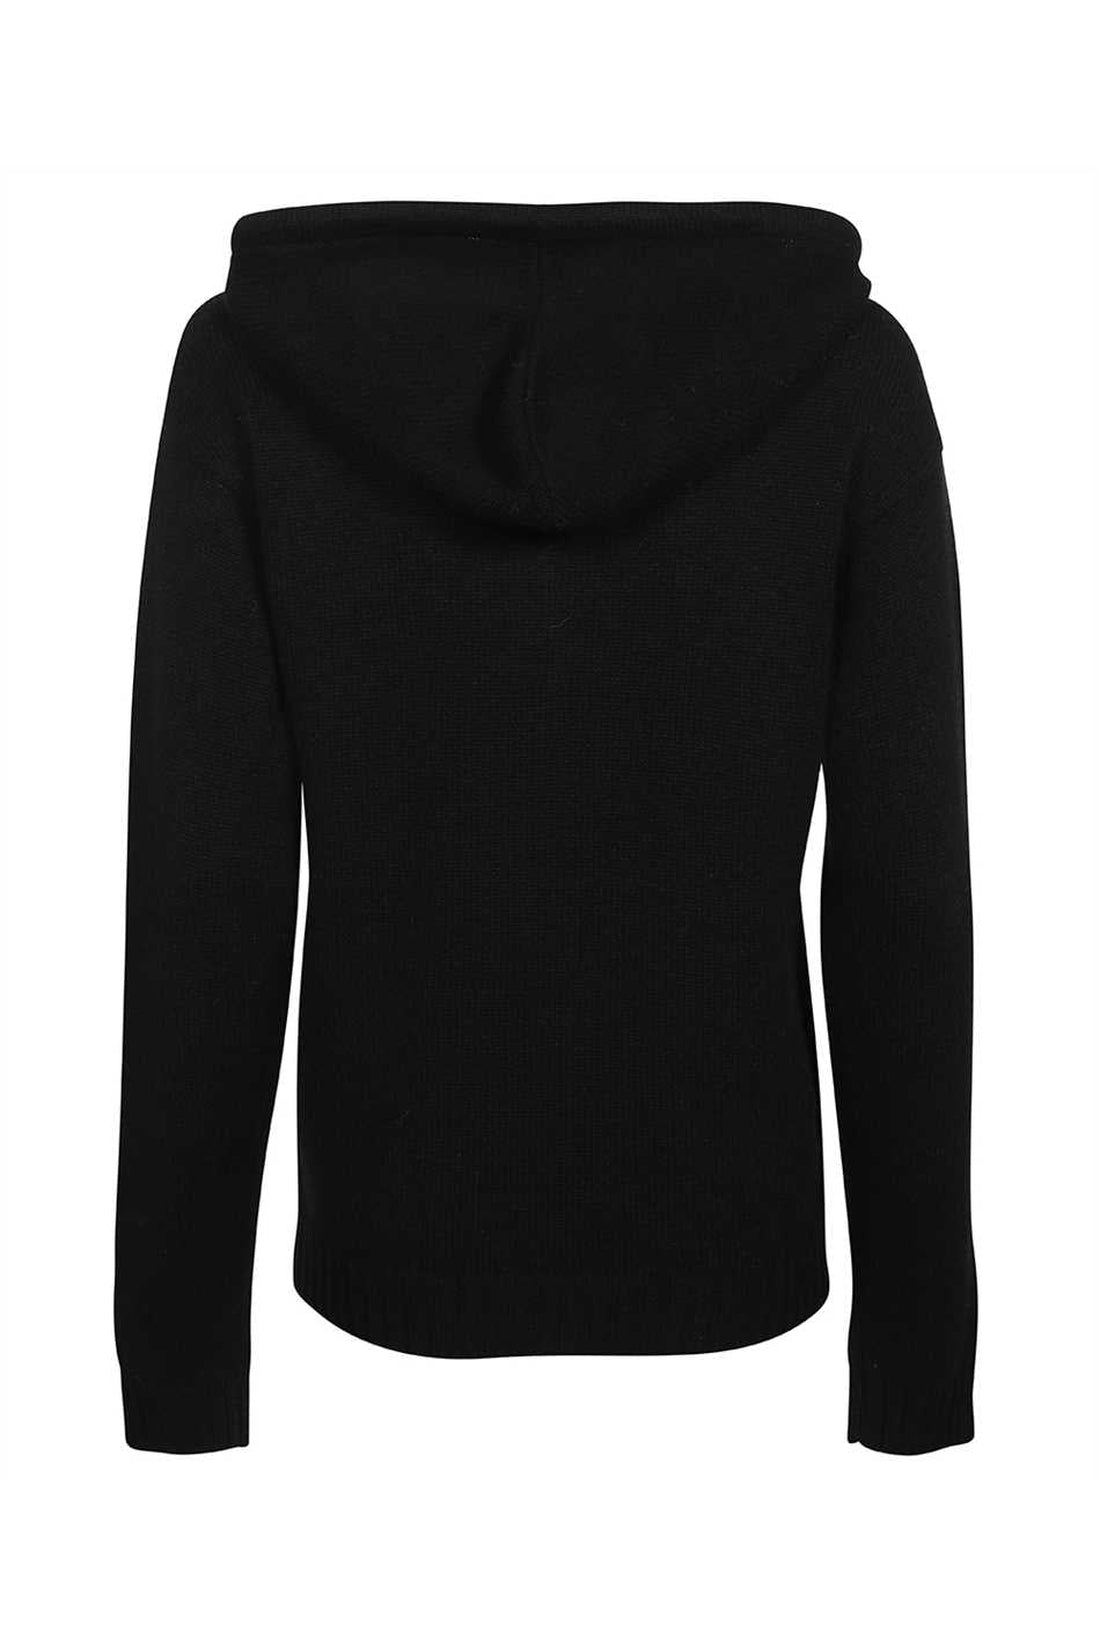 Max Mara-OUTLET-SALE-Rienza knitted hoodie-ARCHIVIST